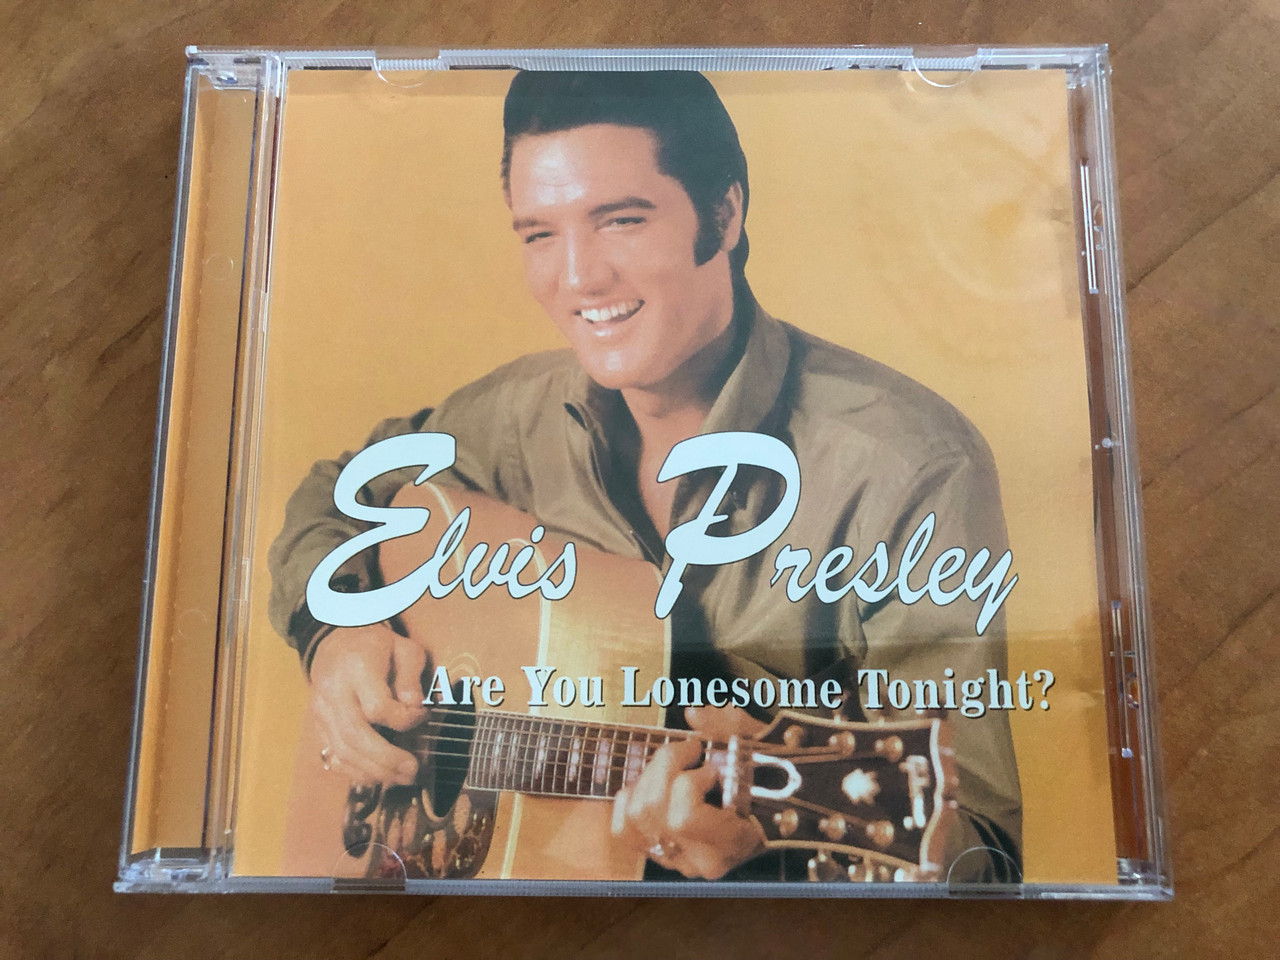 https://cdn10.bigcommerce.com/s-62bdpkt7pb/products/30897/images/182249/Elvis_Presley_-_Are_You_Lonesome_Tonight_Audio_CD_WL-108_1__67868.1624388125.1280.1280.JPG?c=2